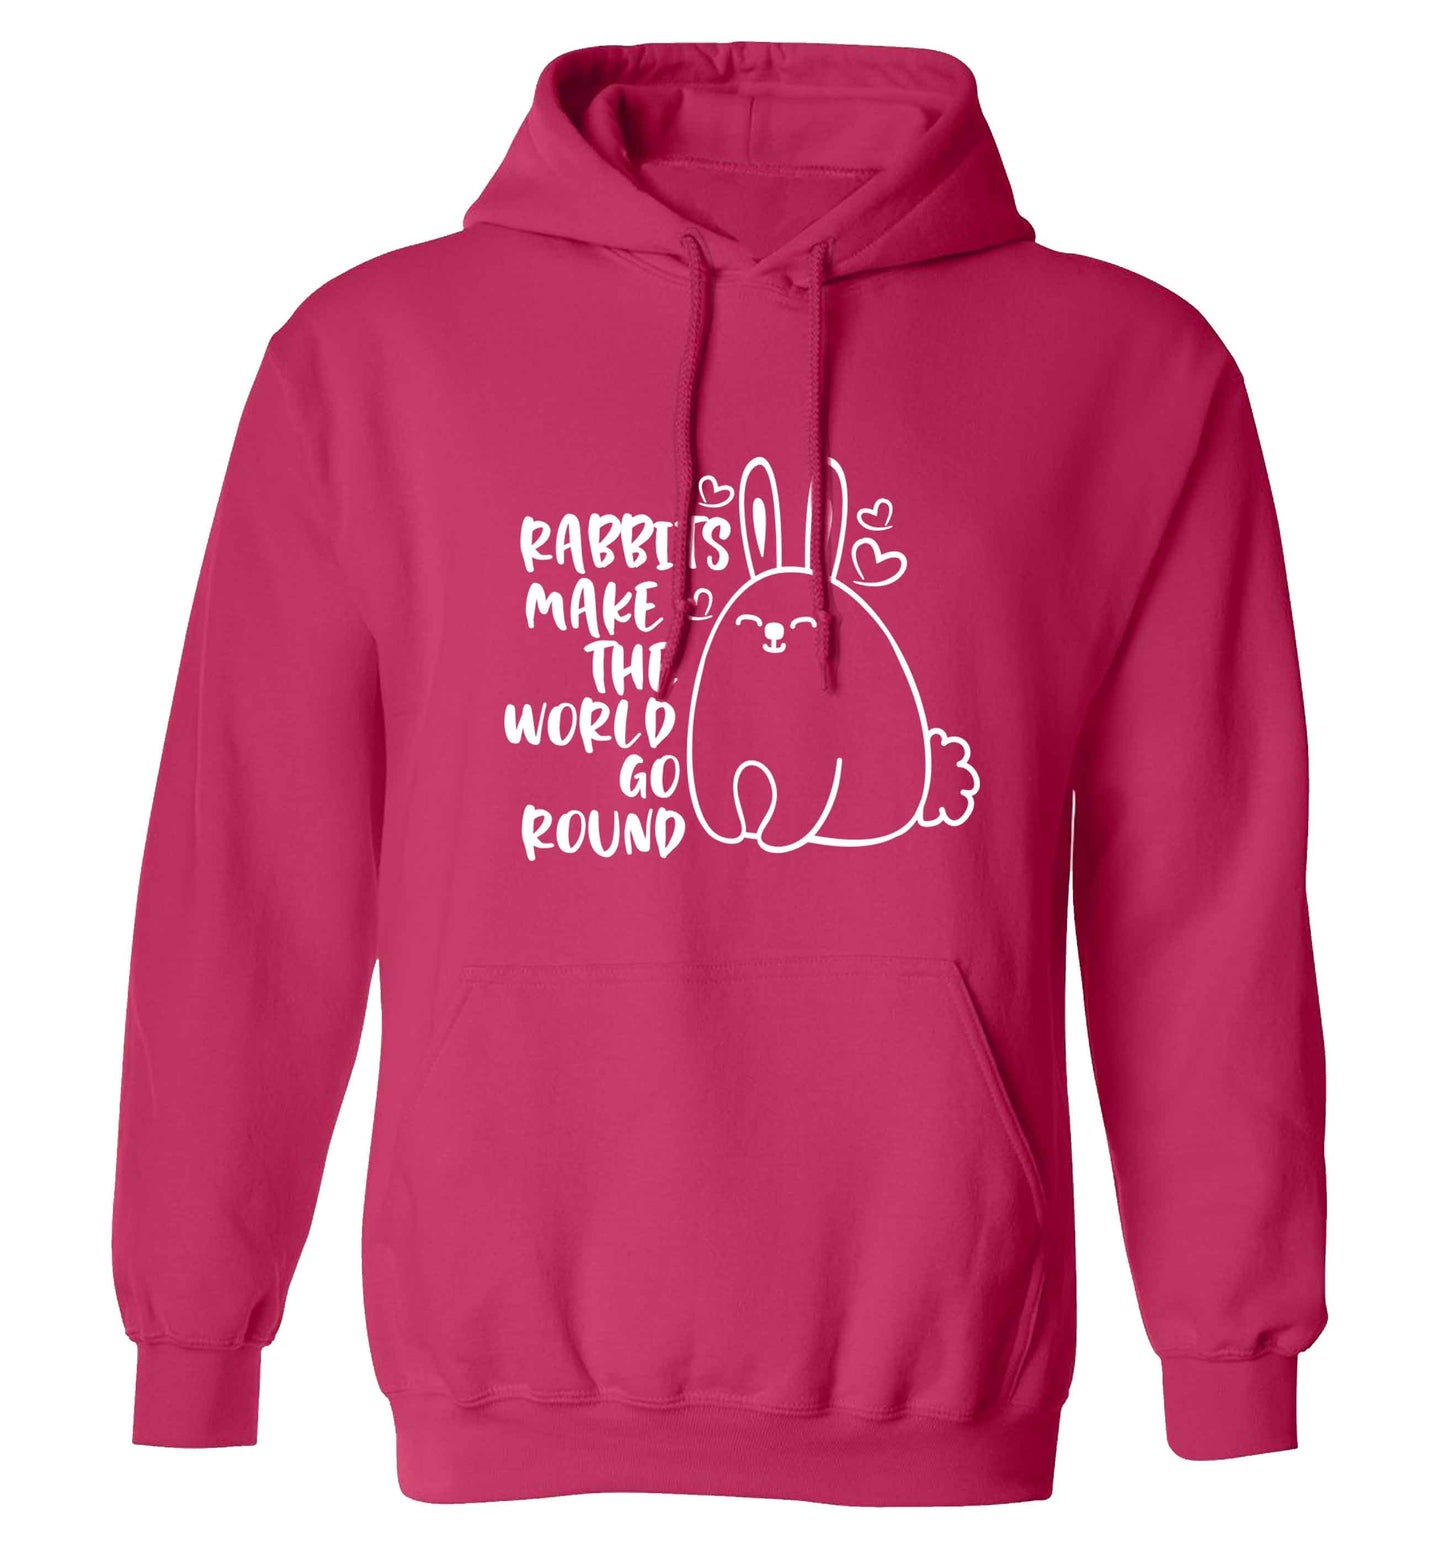 Rabbits make the world go round adults unisex pink hoodie 2XL